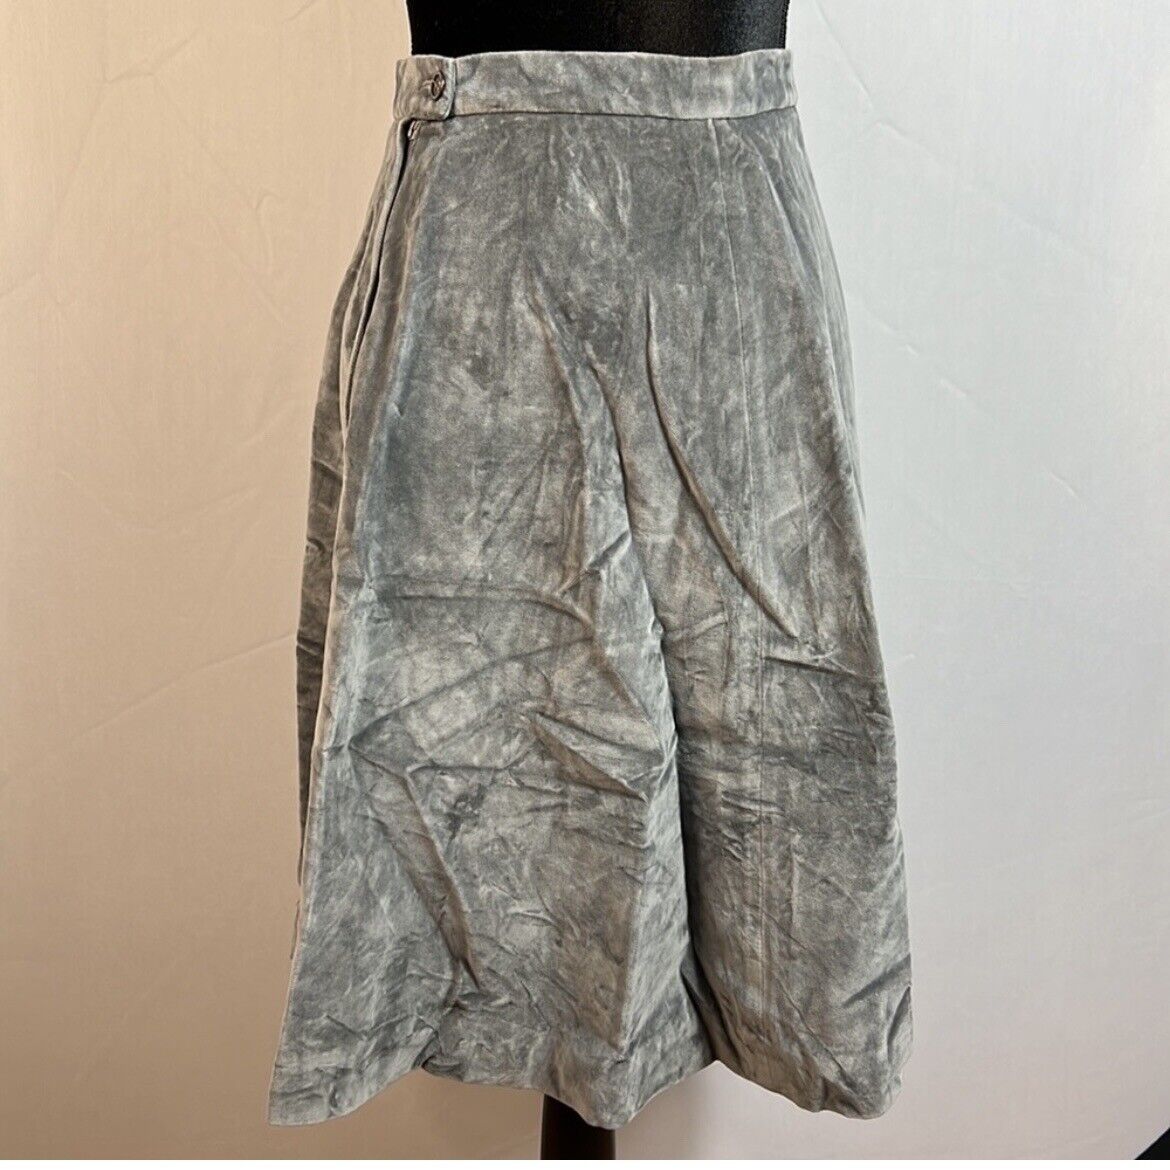 Lorch Company Vintage Silver/Grey 50s Inspired High Waisted Skirt Small